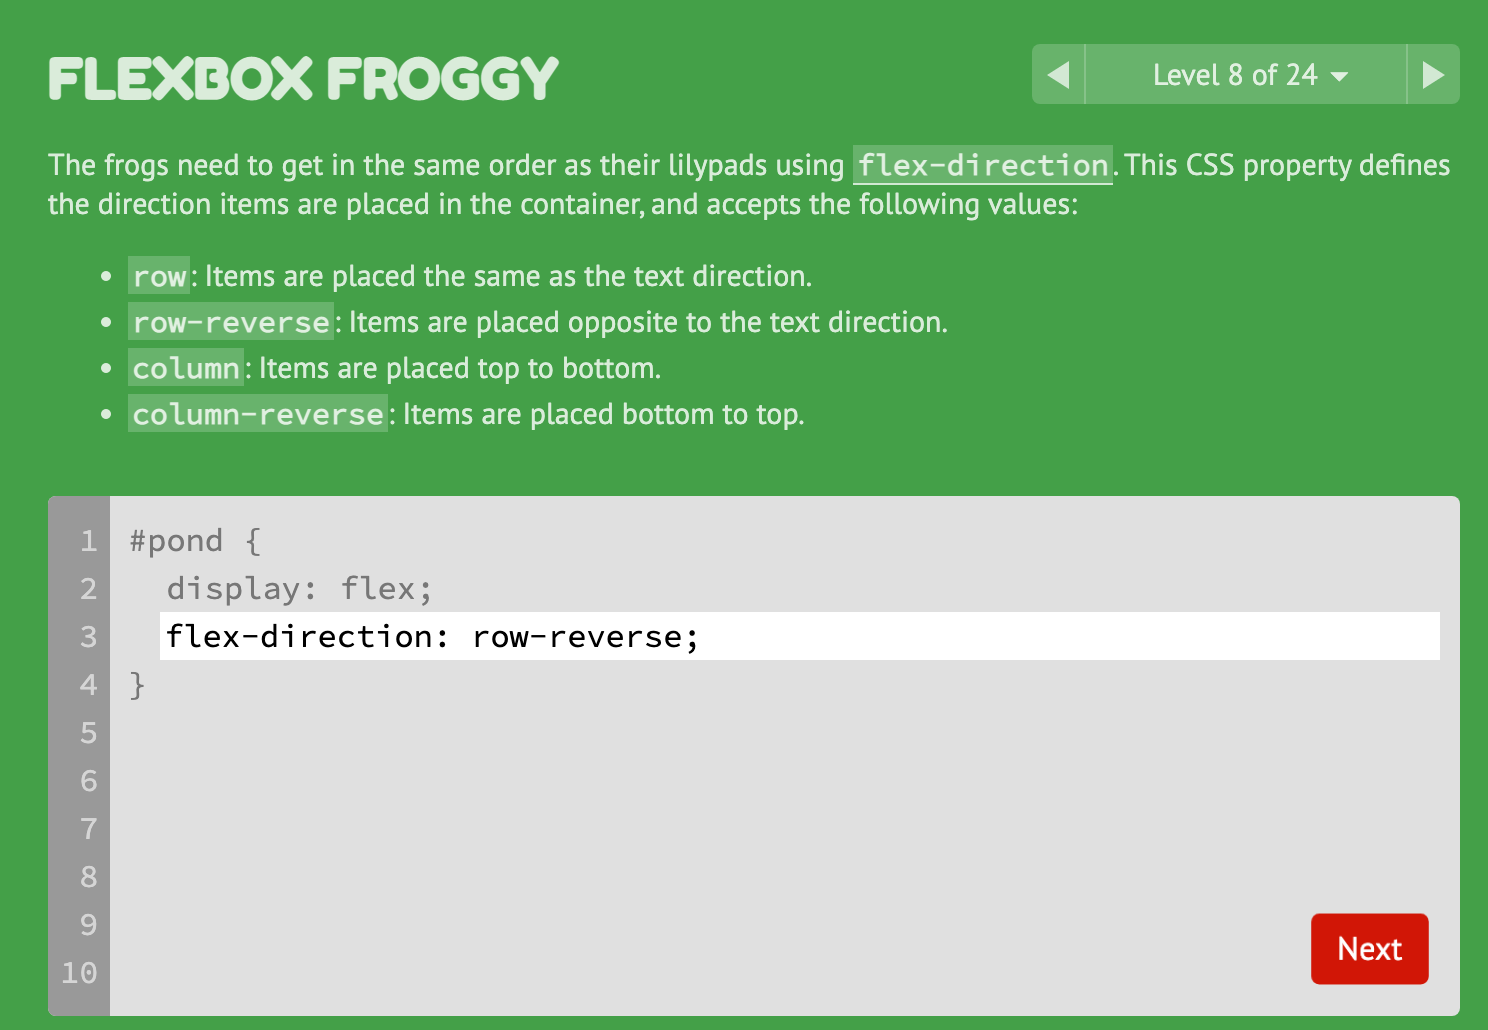 Flexbox Froggy level 8, explaining the flex-direction property, its possible values of row, row-reverse, column, or column-reverse, and a blank to type in the correct property-value pair.